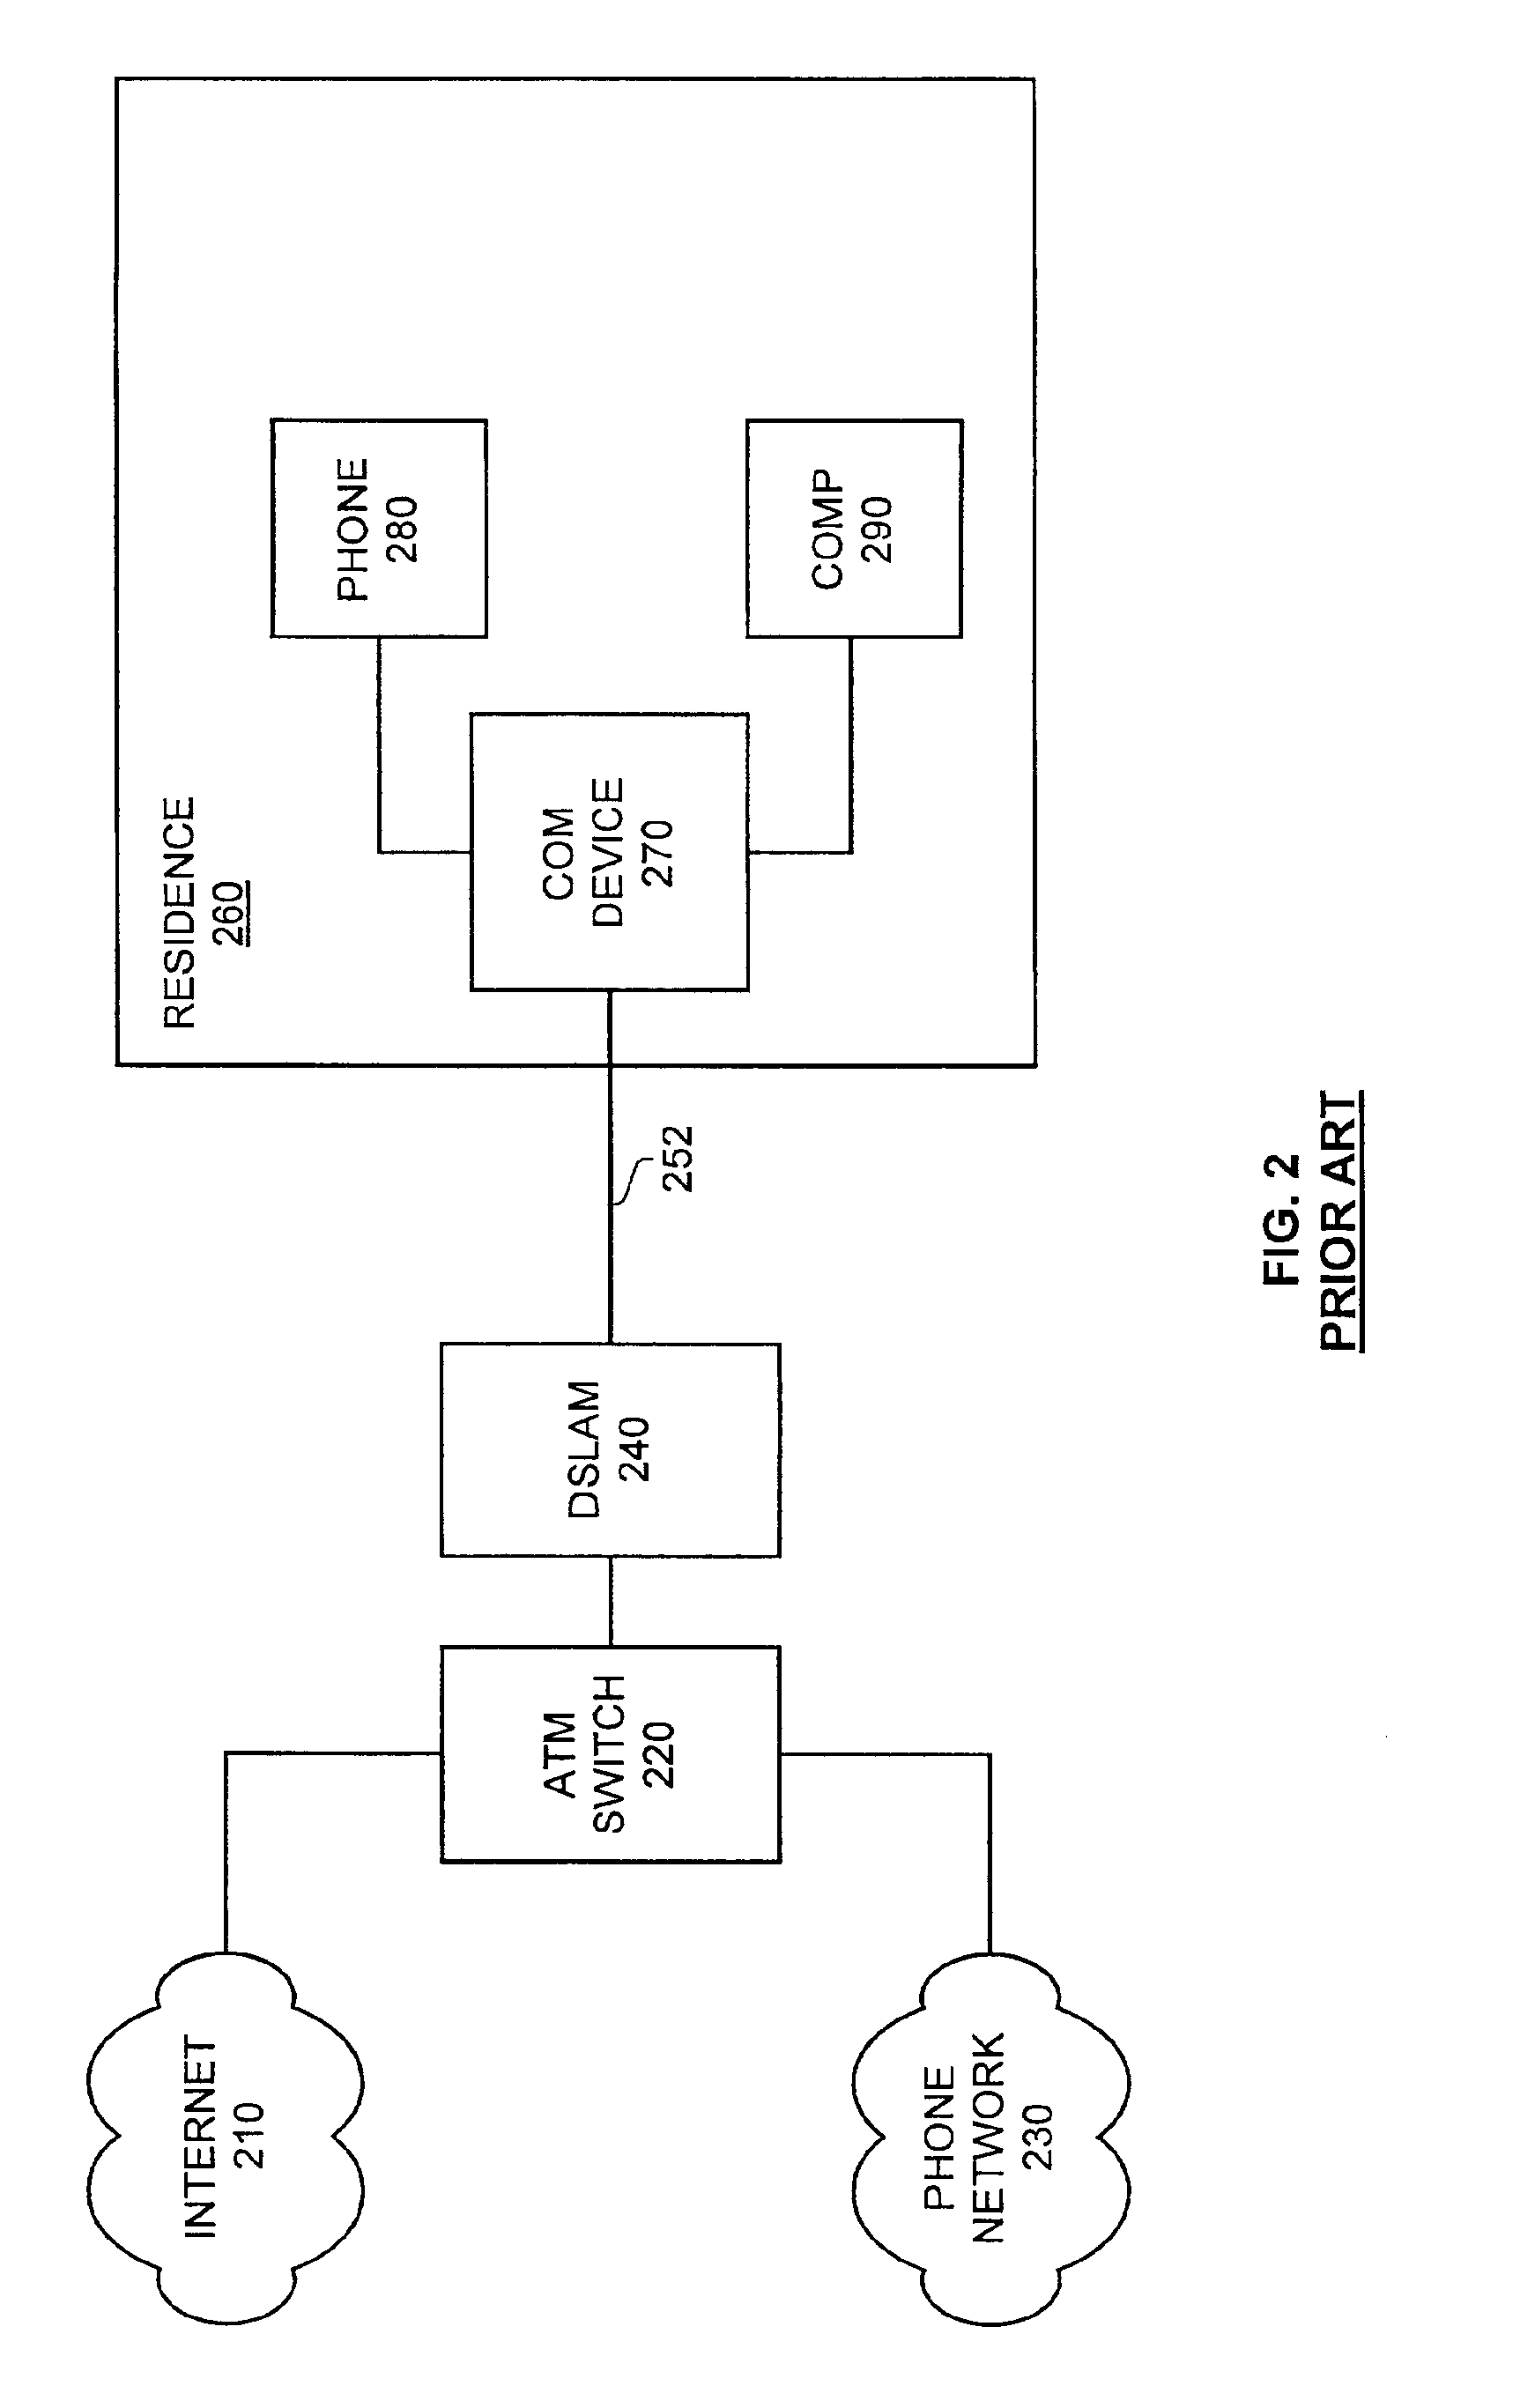 Low power communication device